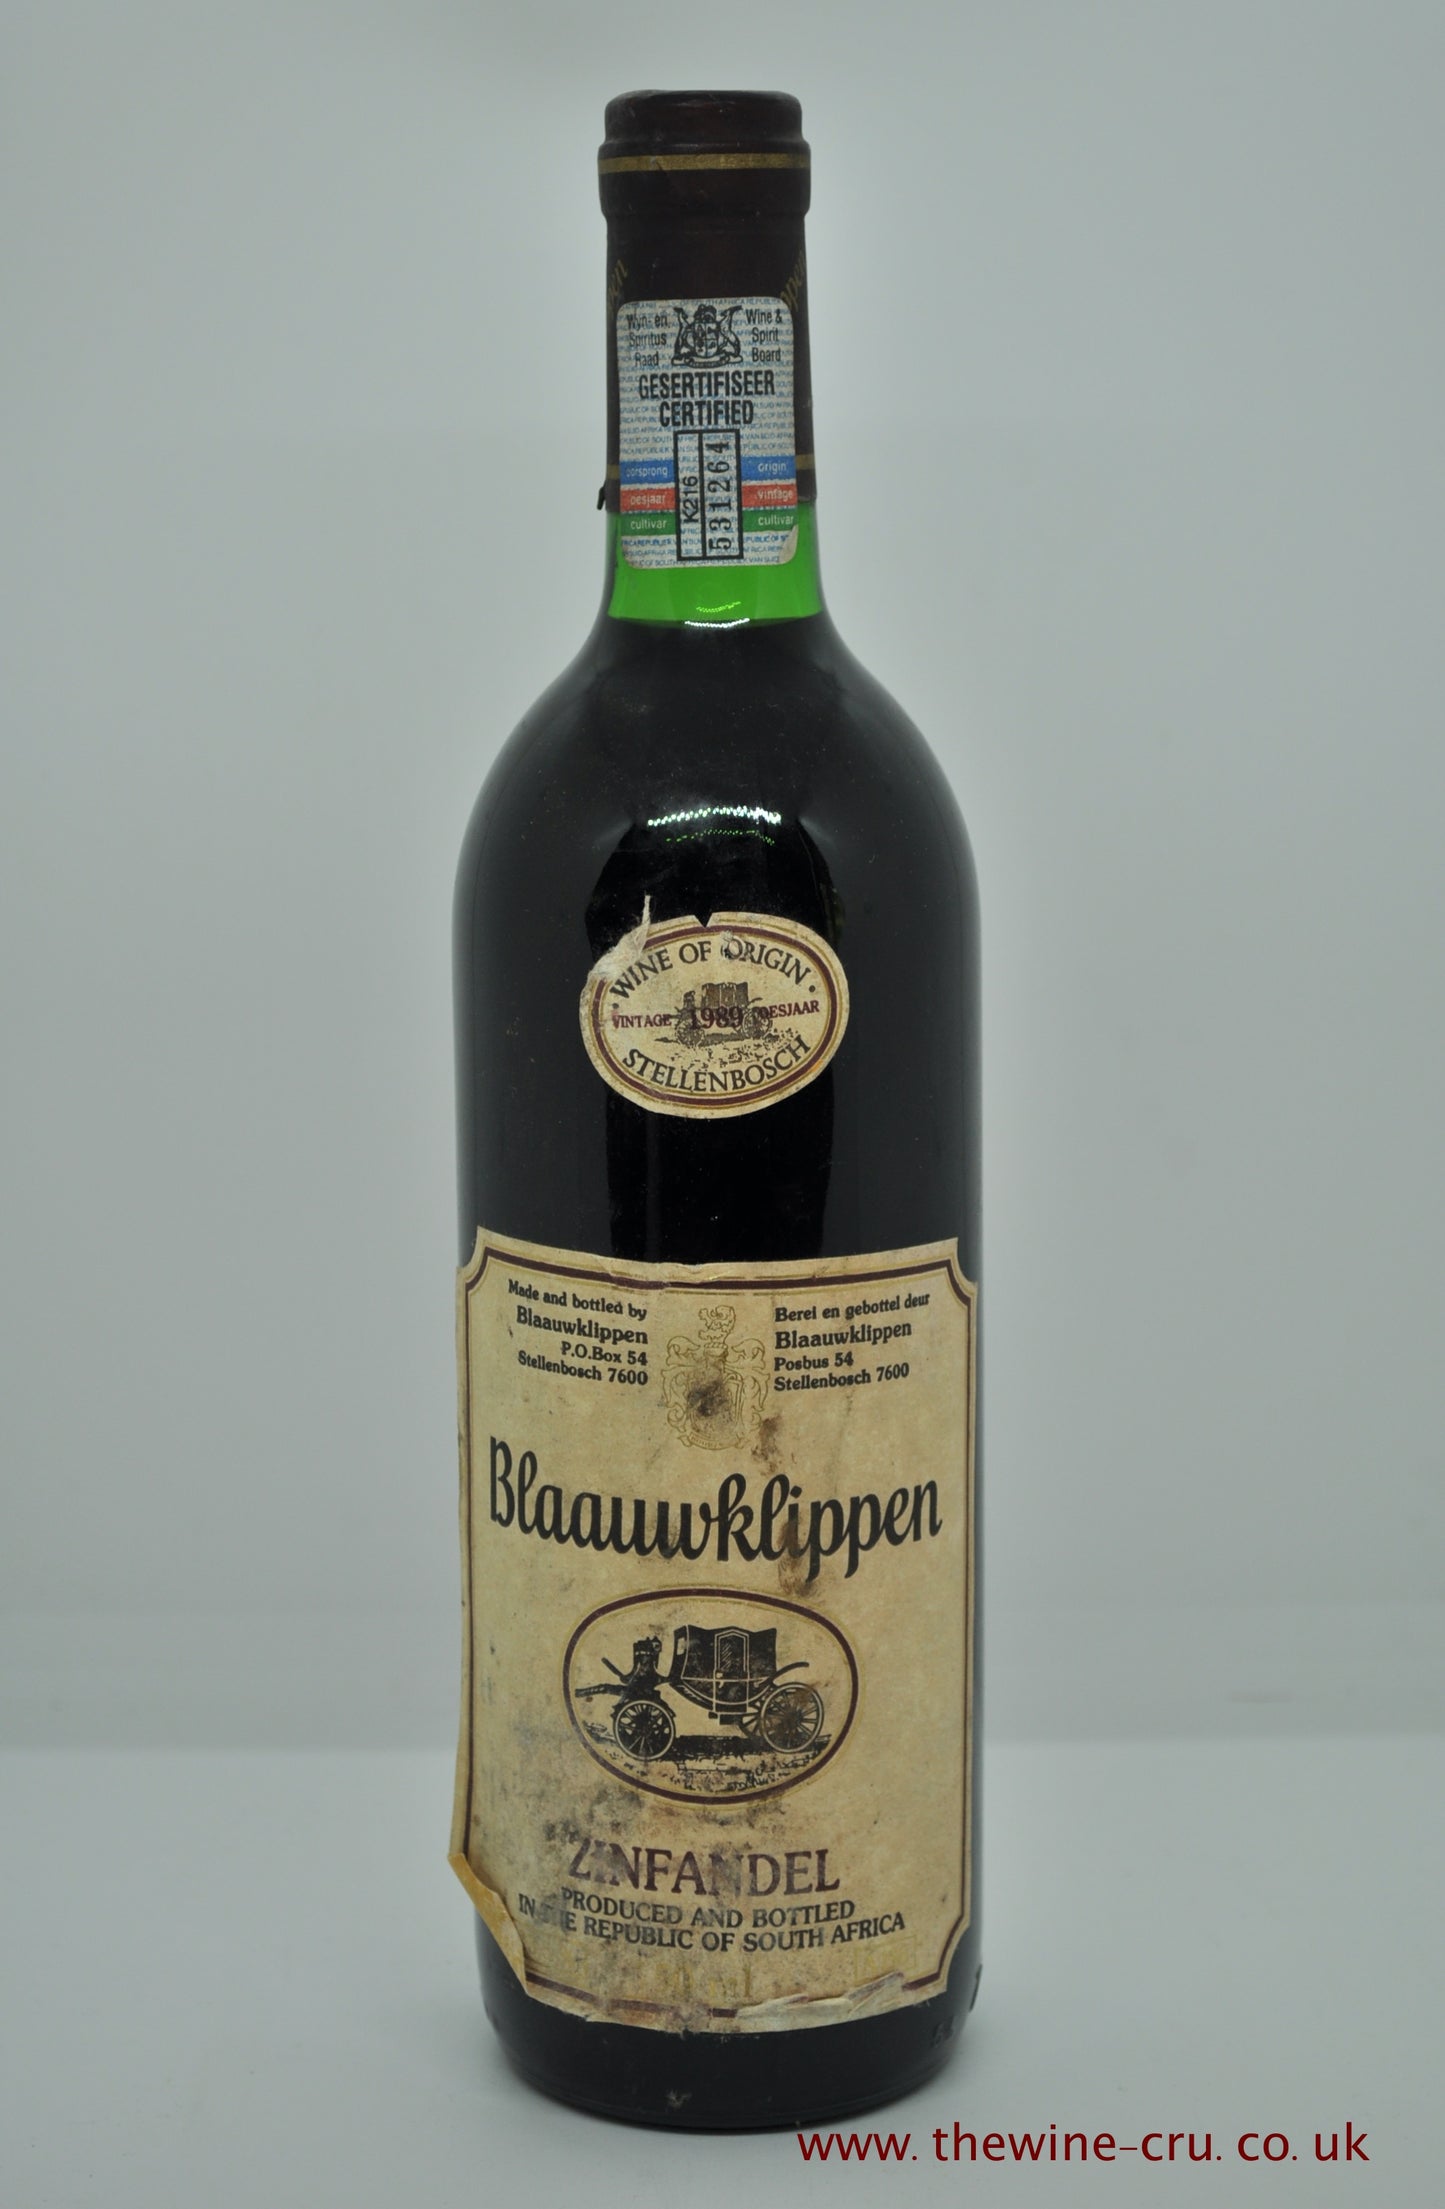 A bottle of 1989 vintage red wine. Blaauwklippen Zinfandel 1989. South Africa. Capsule good. Label complete but a bit scrappy around the edges. Wine level base of neck. Immediate delivery. Free local delivery. Gift wrapping available.